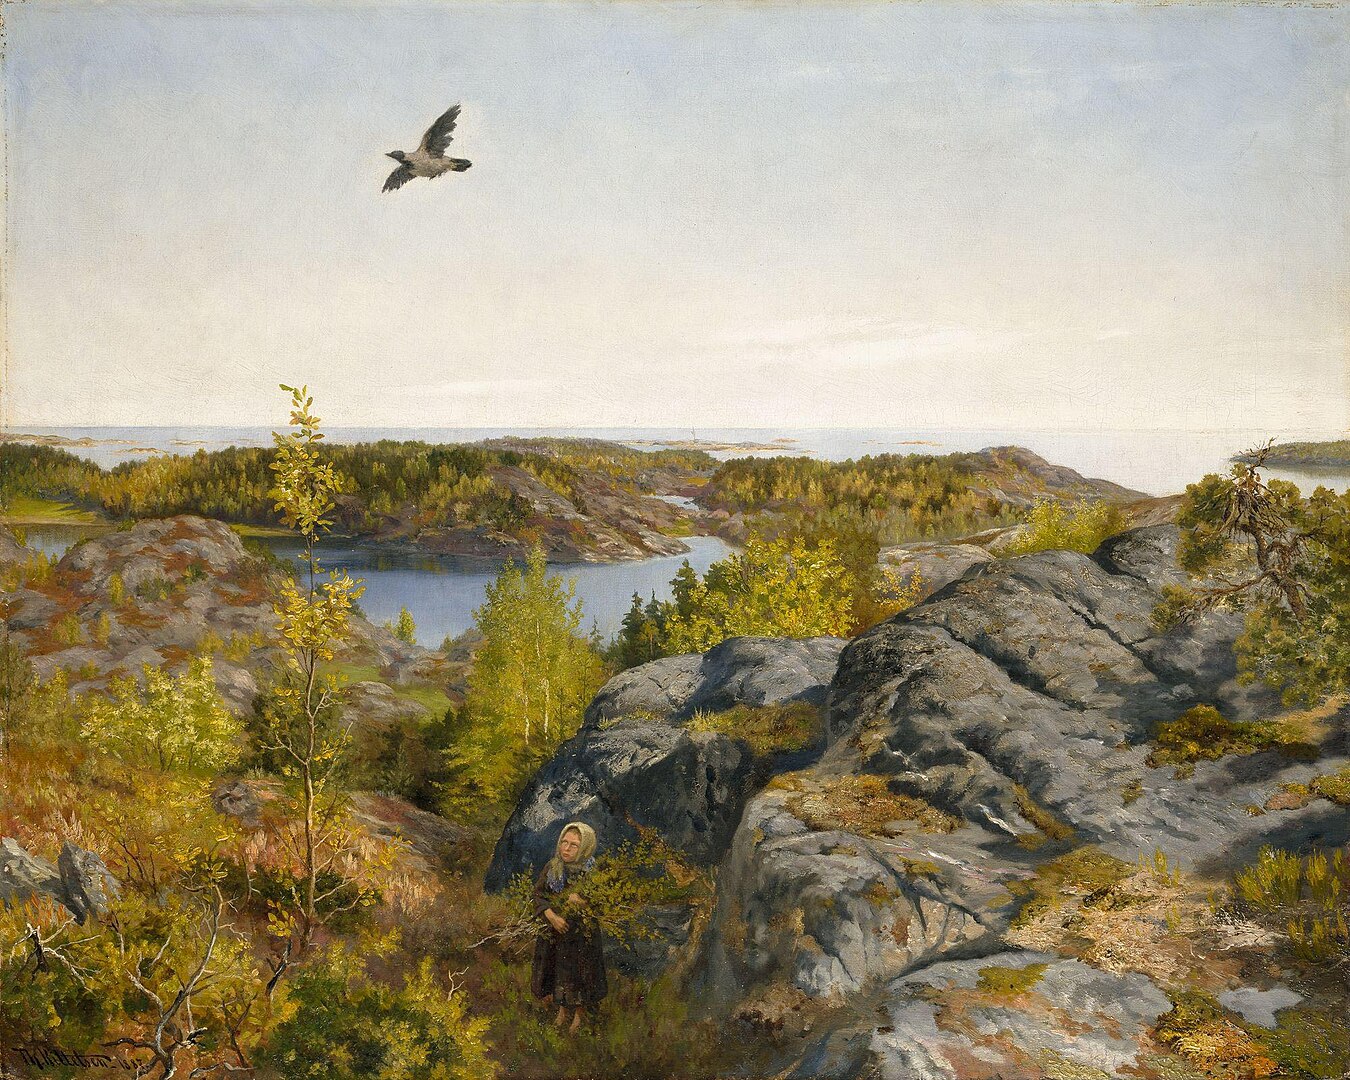 A landscape view of forests and mountains as a lone bird flies in the sky